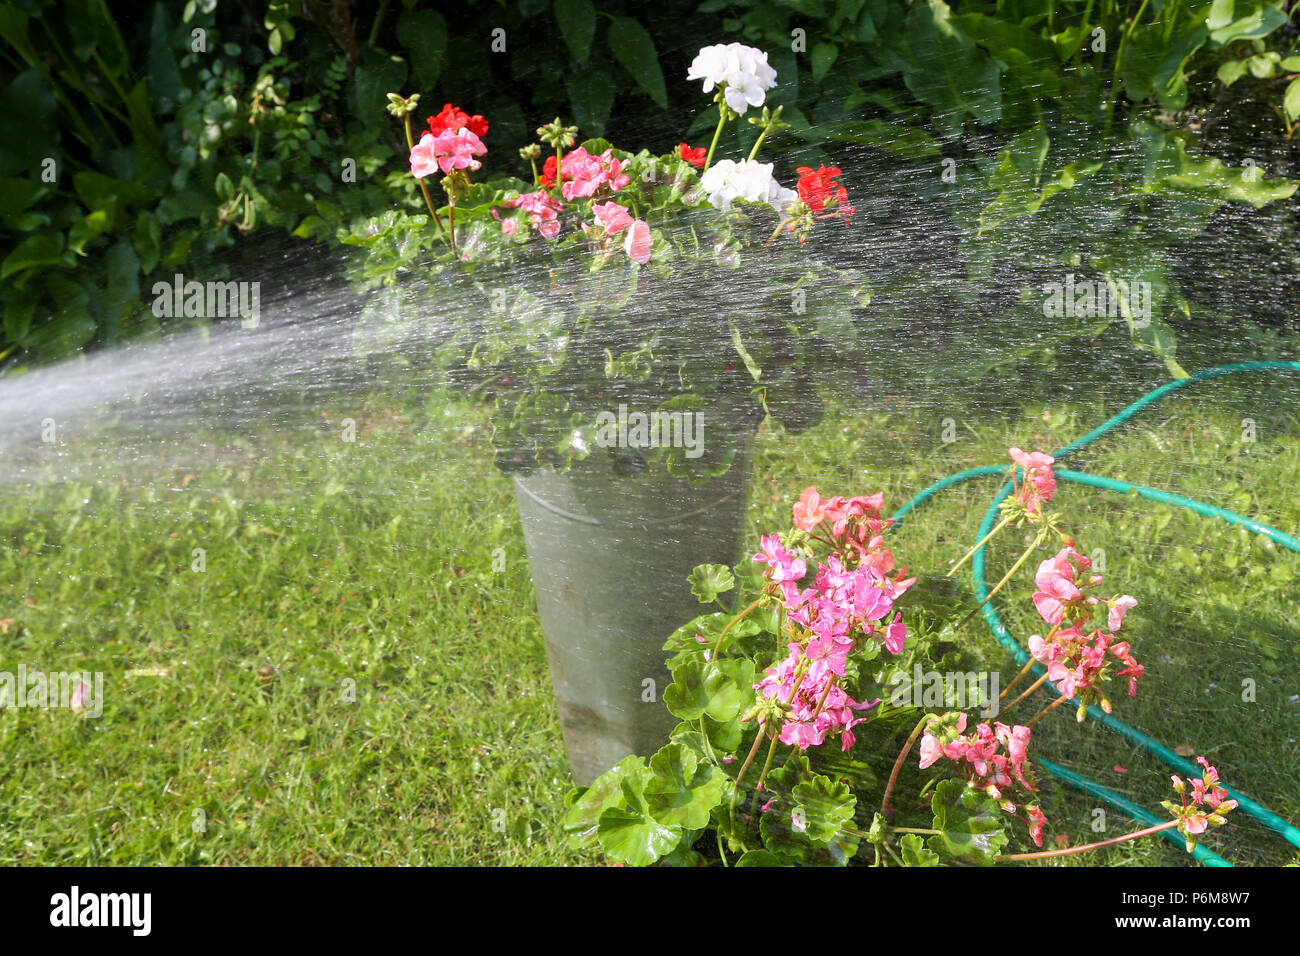 London. UK 1 July 2018 - A gardener watering the plants and lawn using a water hosepipe in his garden. Northern Ireland brought in hosepipe ban in six years as water reservoir levels have dropped due to mini heatwave in the UK. According to the the Met Office July will be dry, sunny and above average temperatures across the UK.   Credit: Dinendra Haria/Alamy Live News Stock Photo